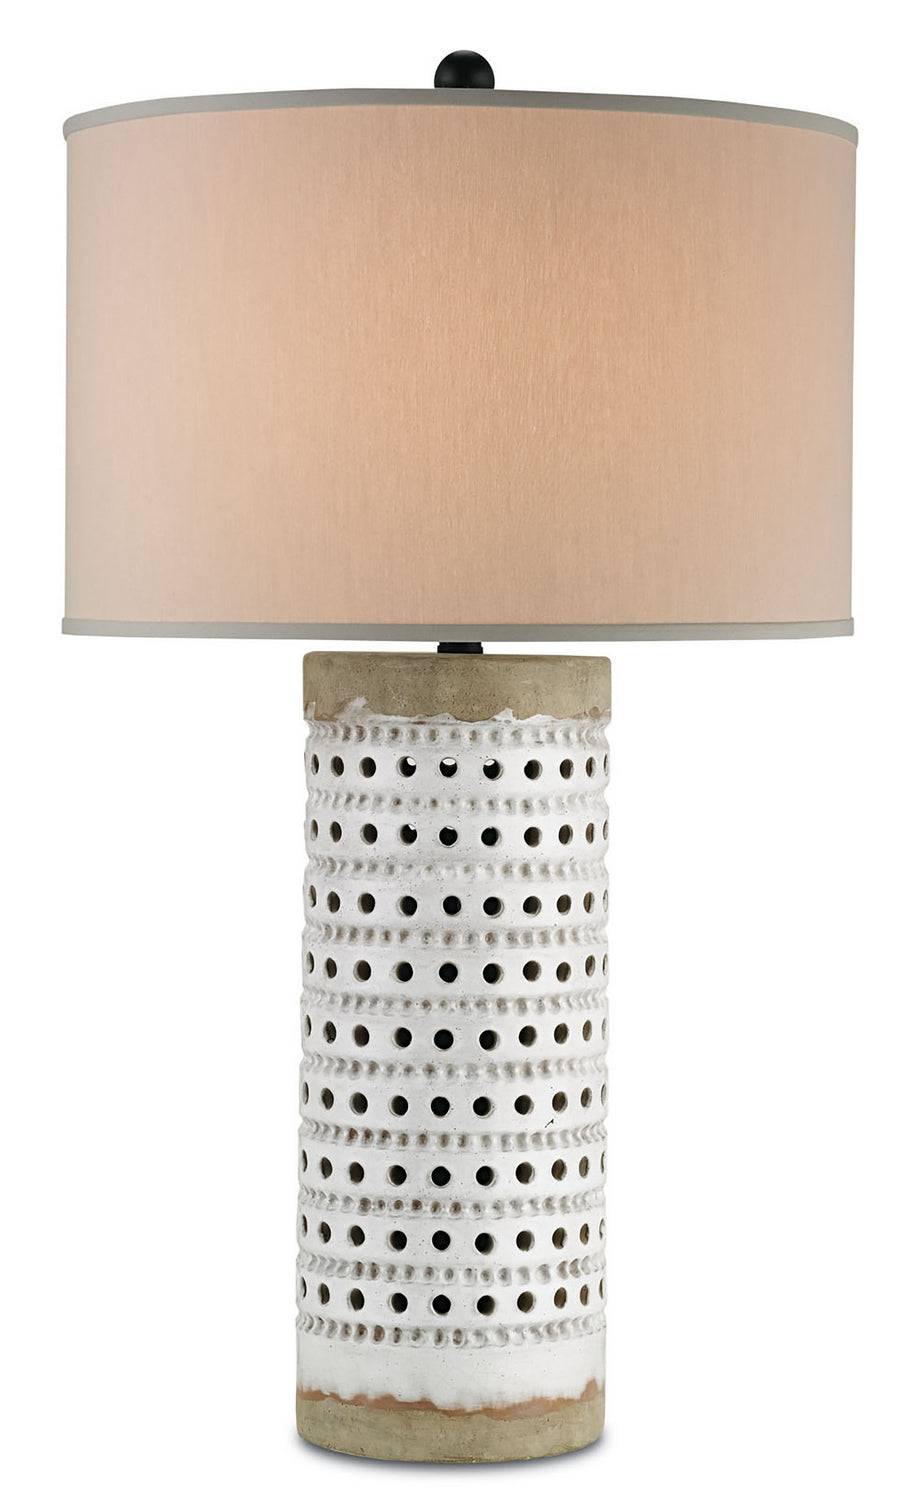 One Light Table Lamp from the Terrace collection in Antique White Crackle/Satin Black finish